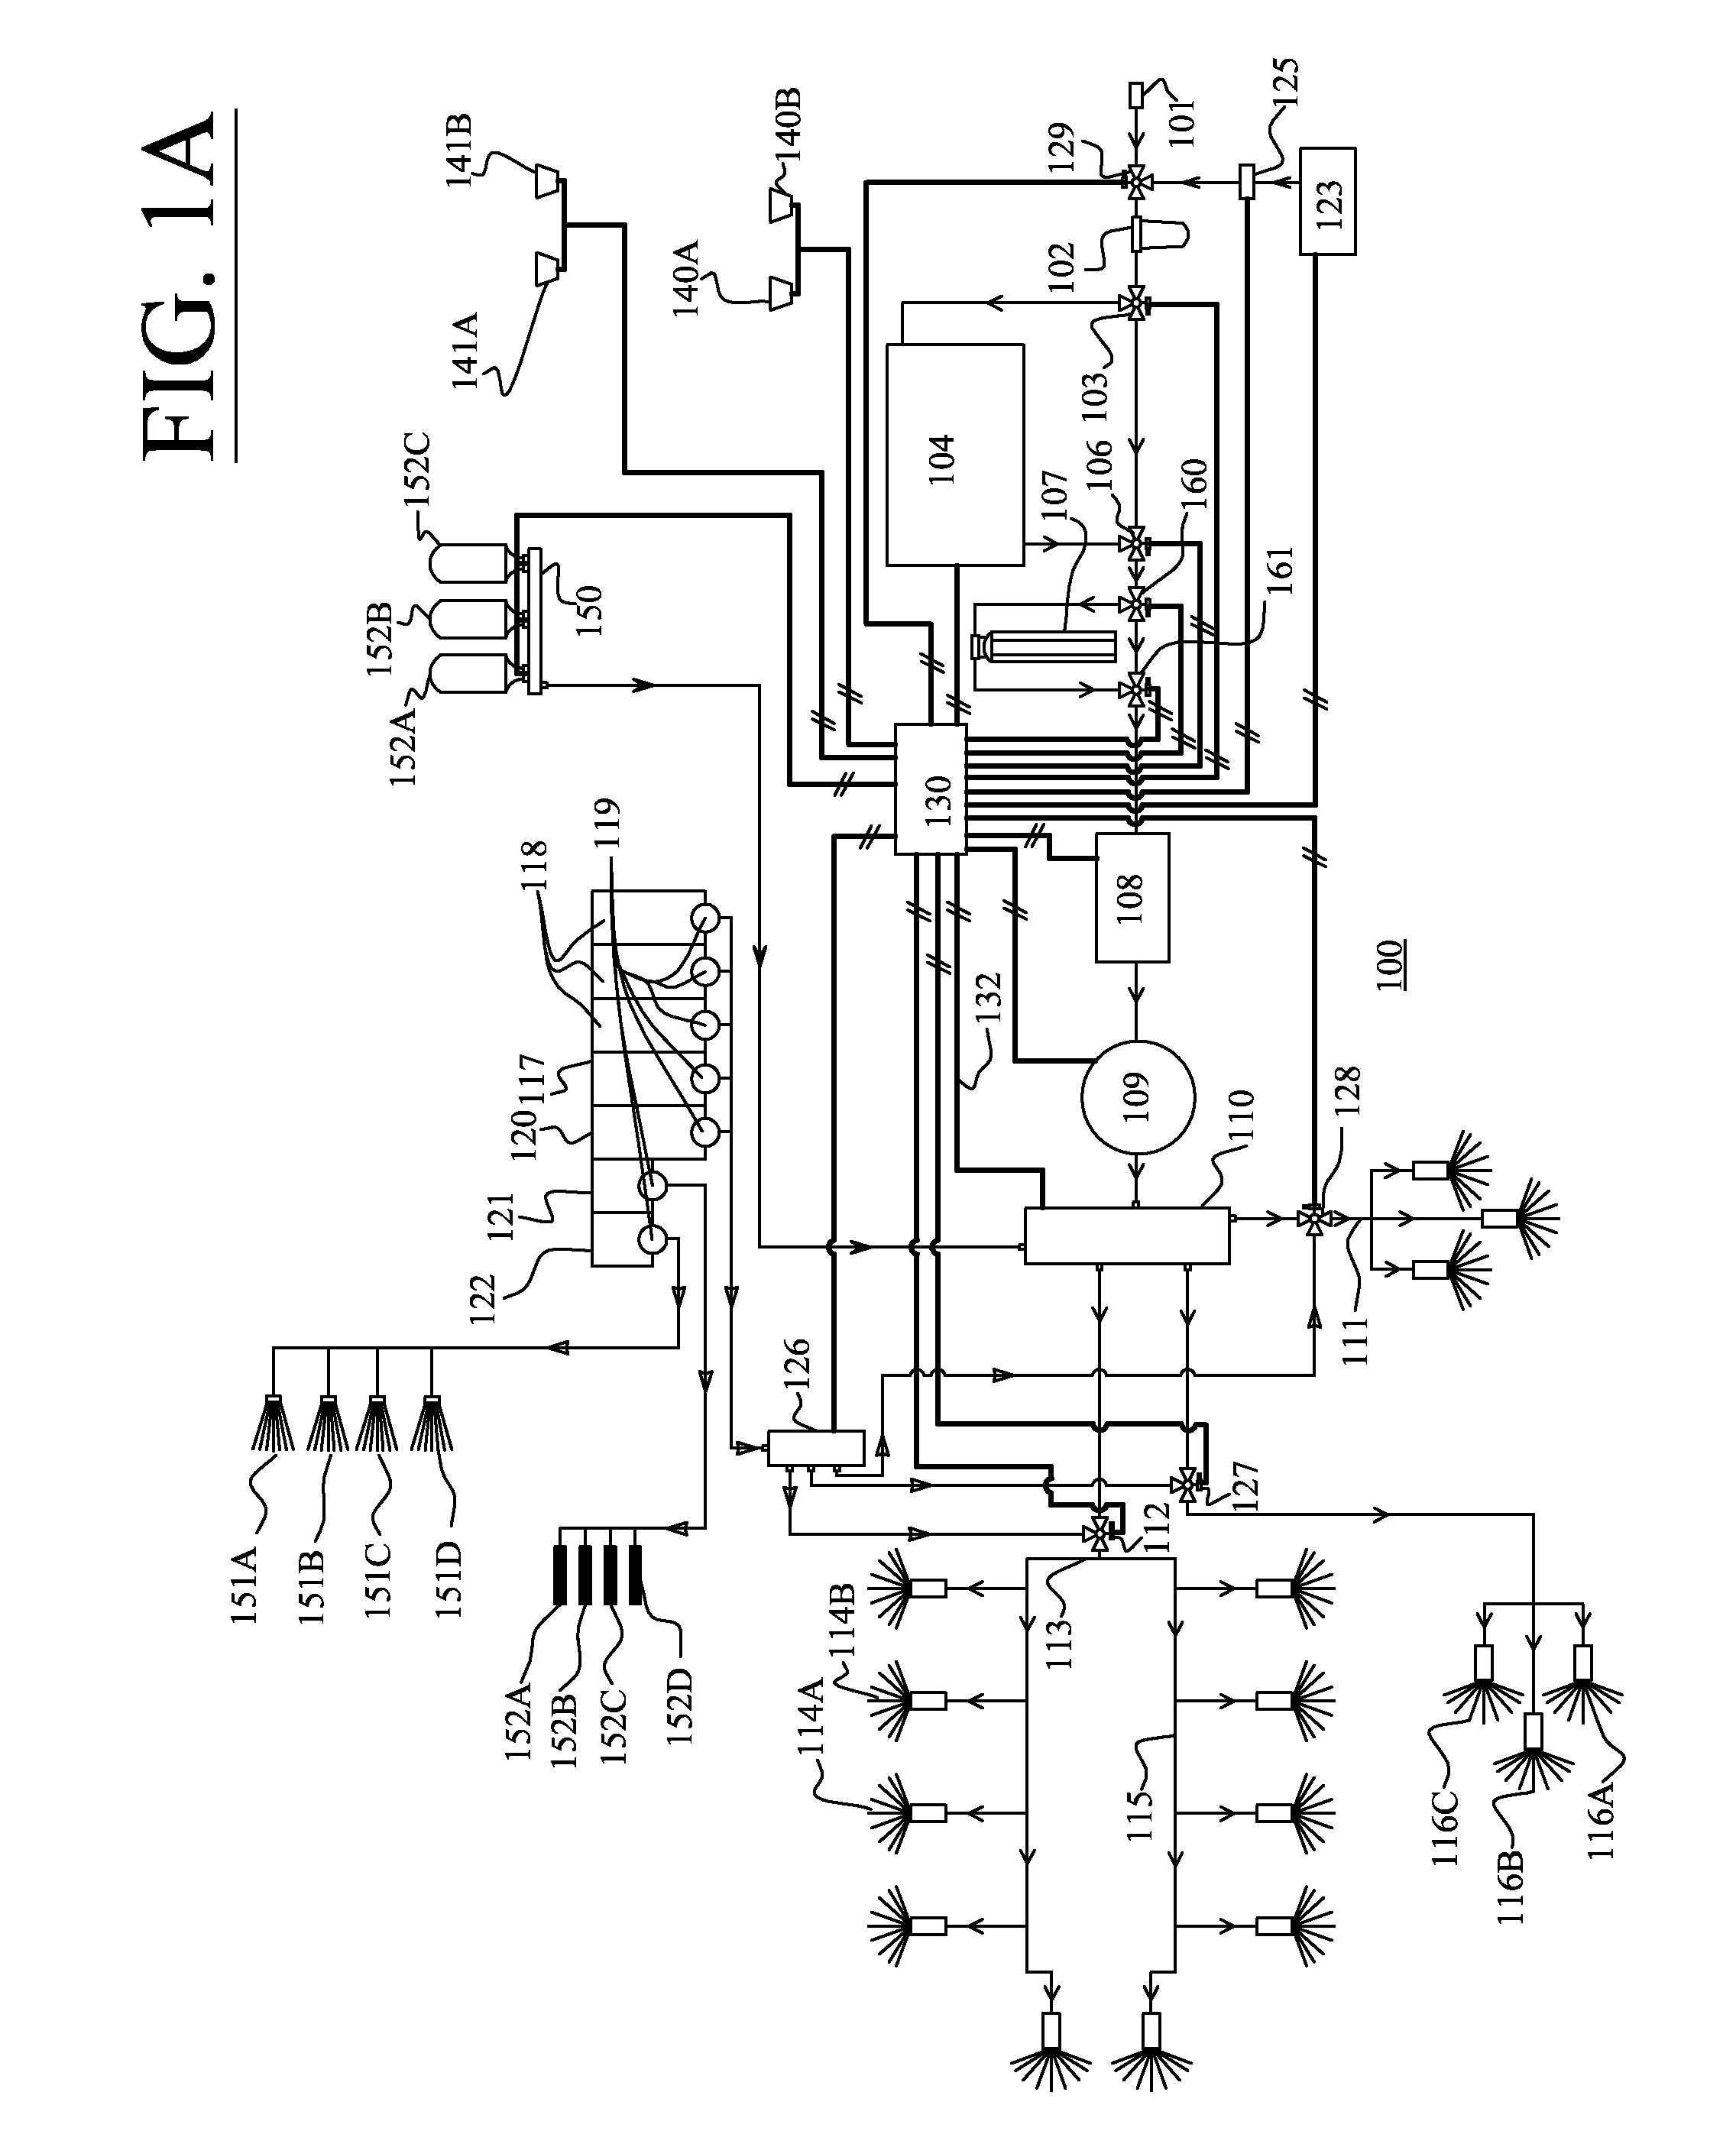 System and apparatus for automatic built-in vehicle washing and other operations